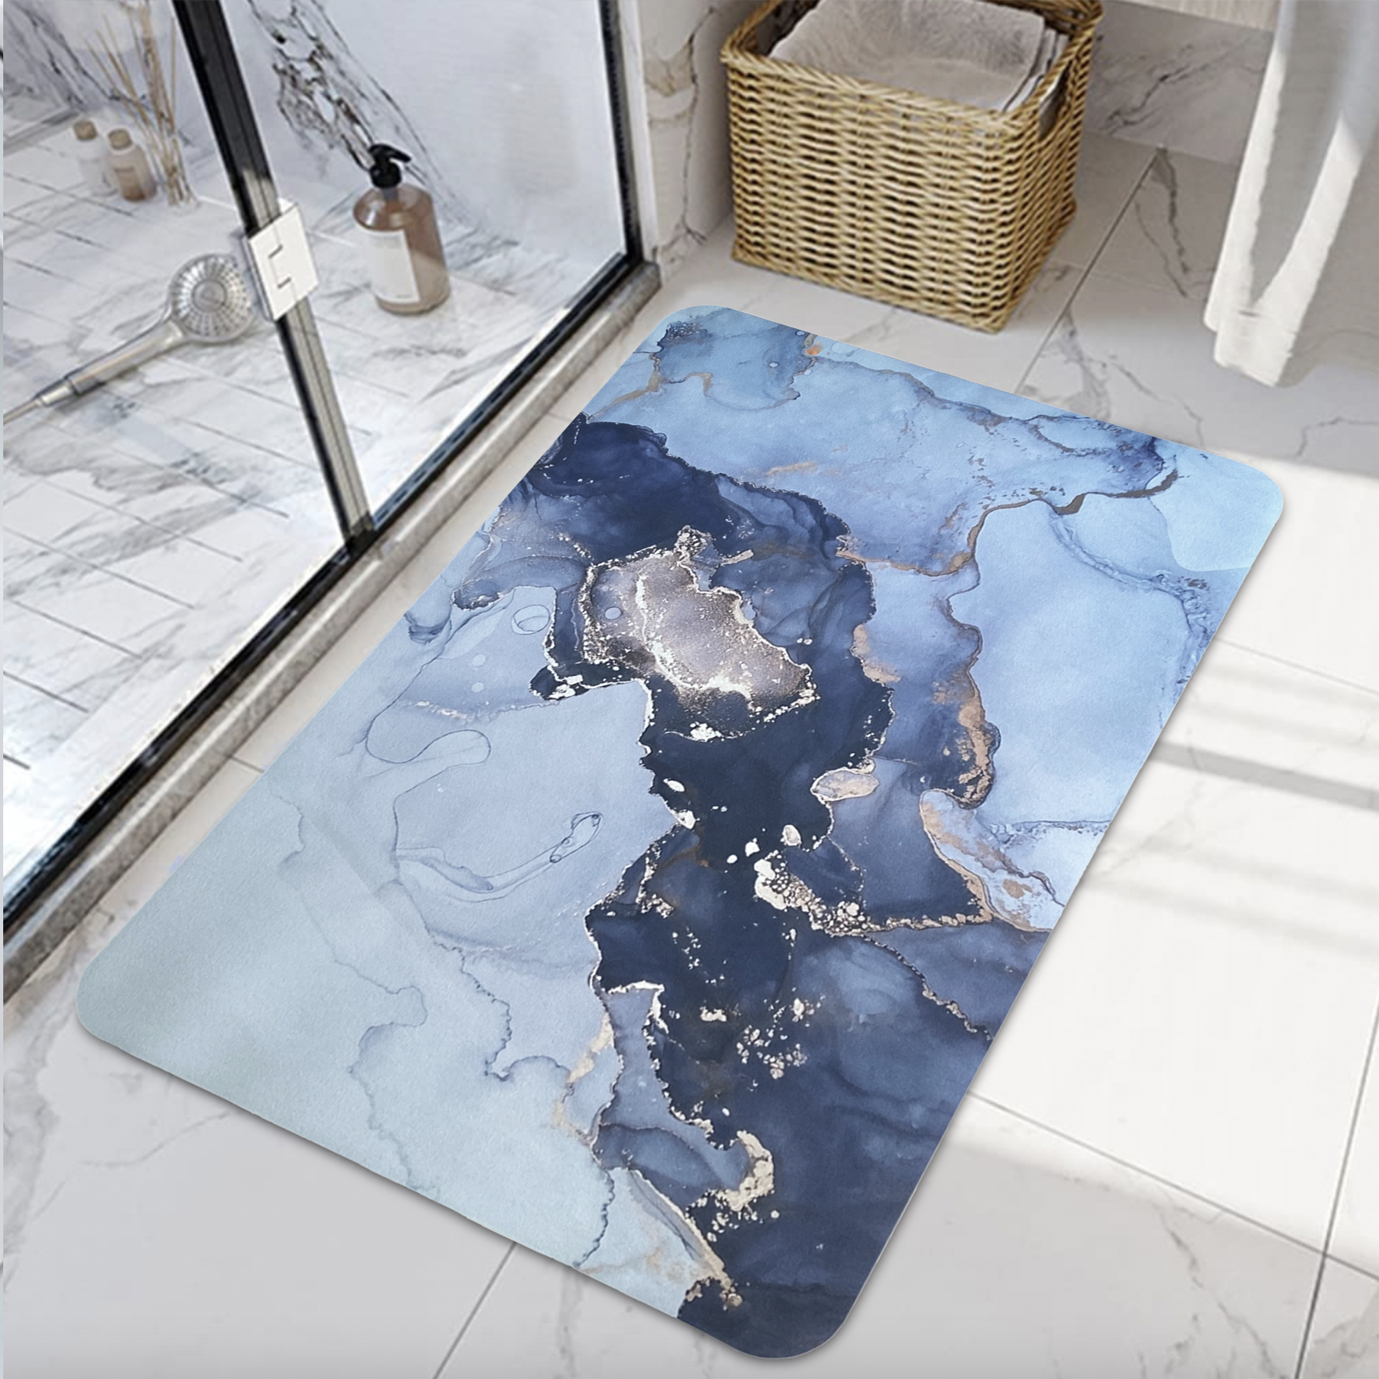 49% off on Bathroom Deluxe Non-Slip Bath Mat | OneDayOnly